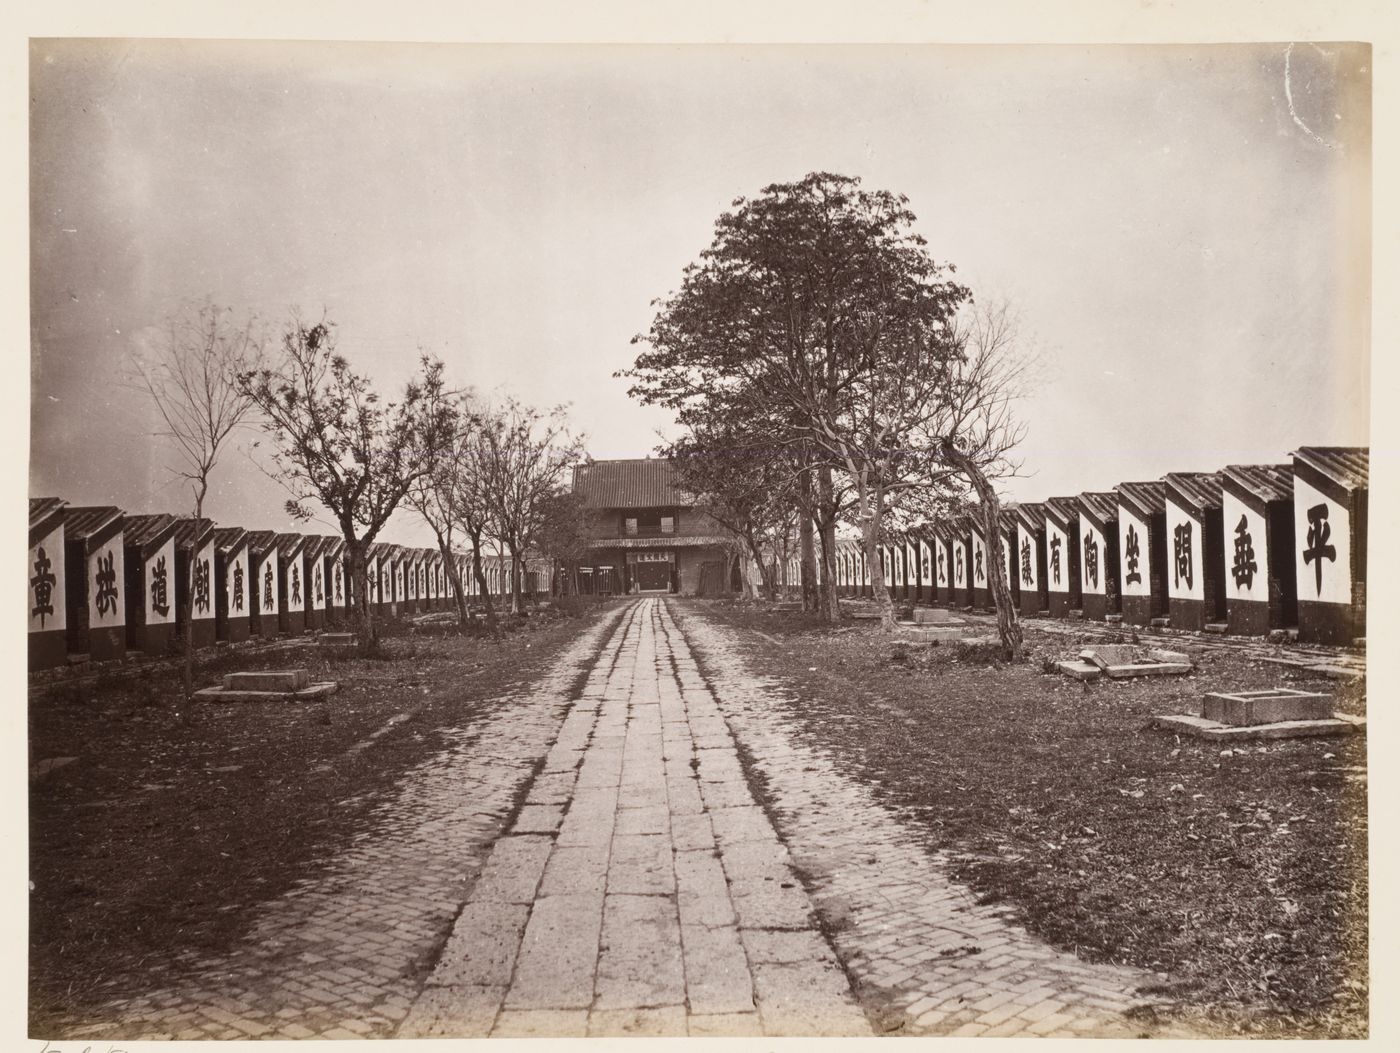 View of the Examination Hall (also known as the Examination Yard [Gong Yuan]), showing a stone walkway and the administration building, Canton (now Guangzhou), China